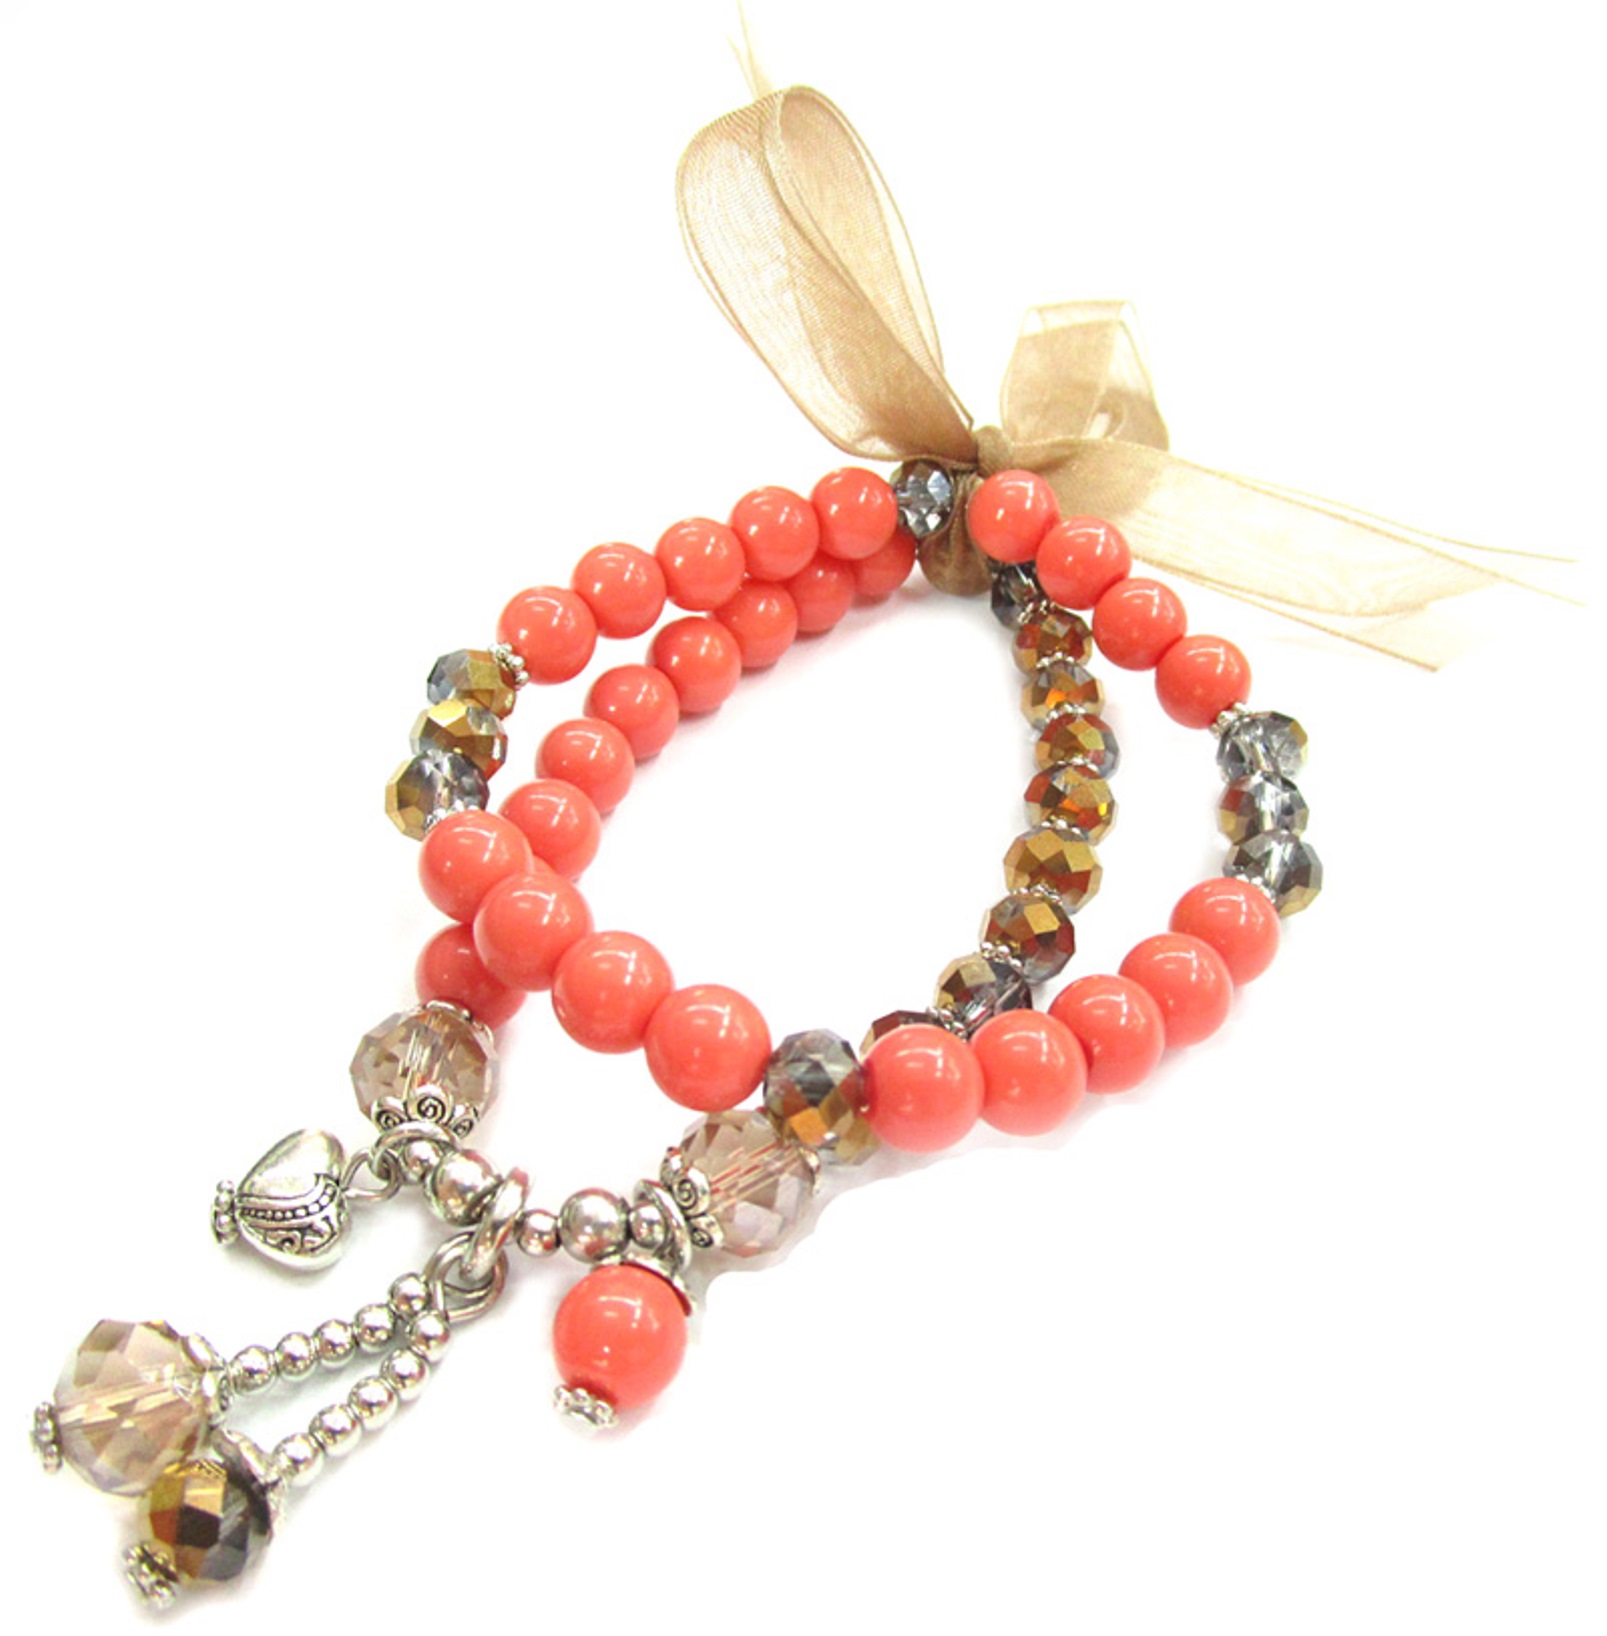 2 Piece Set Stretch Bracelets with Charms in 8mm Simulated Coral and Simulated Crystals with Ribbon Bow